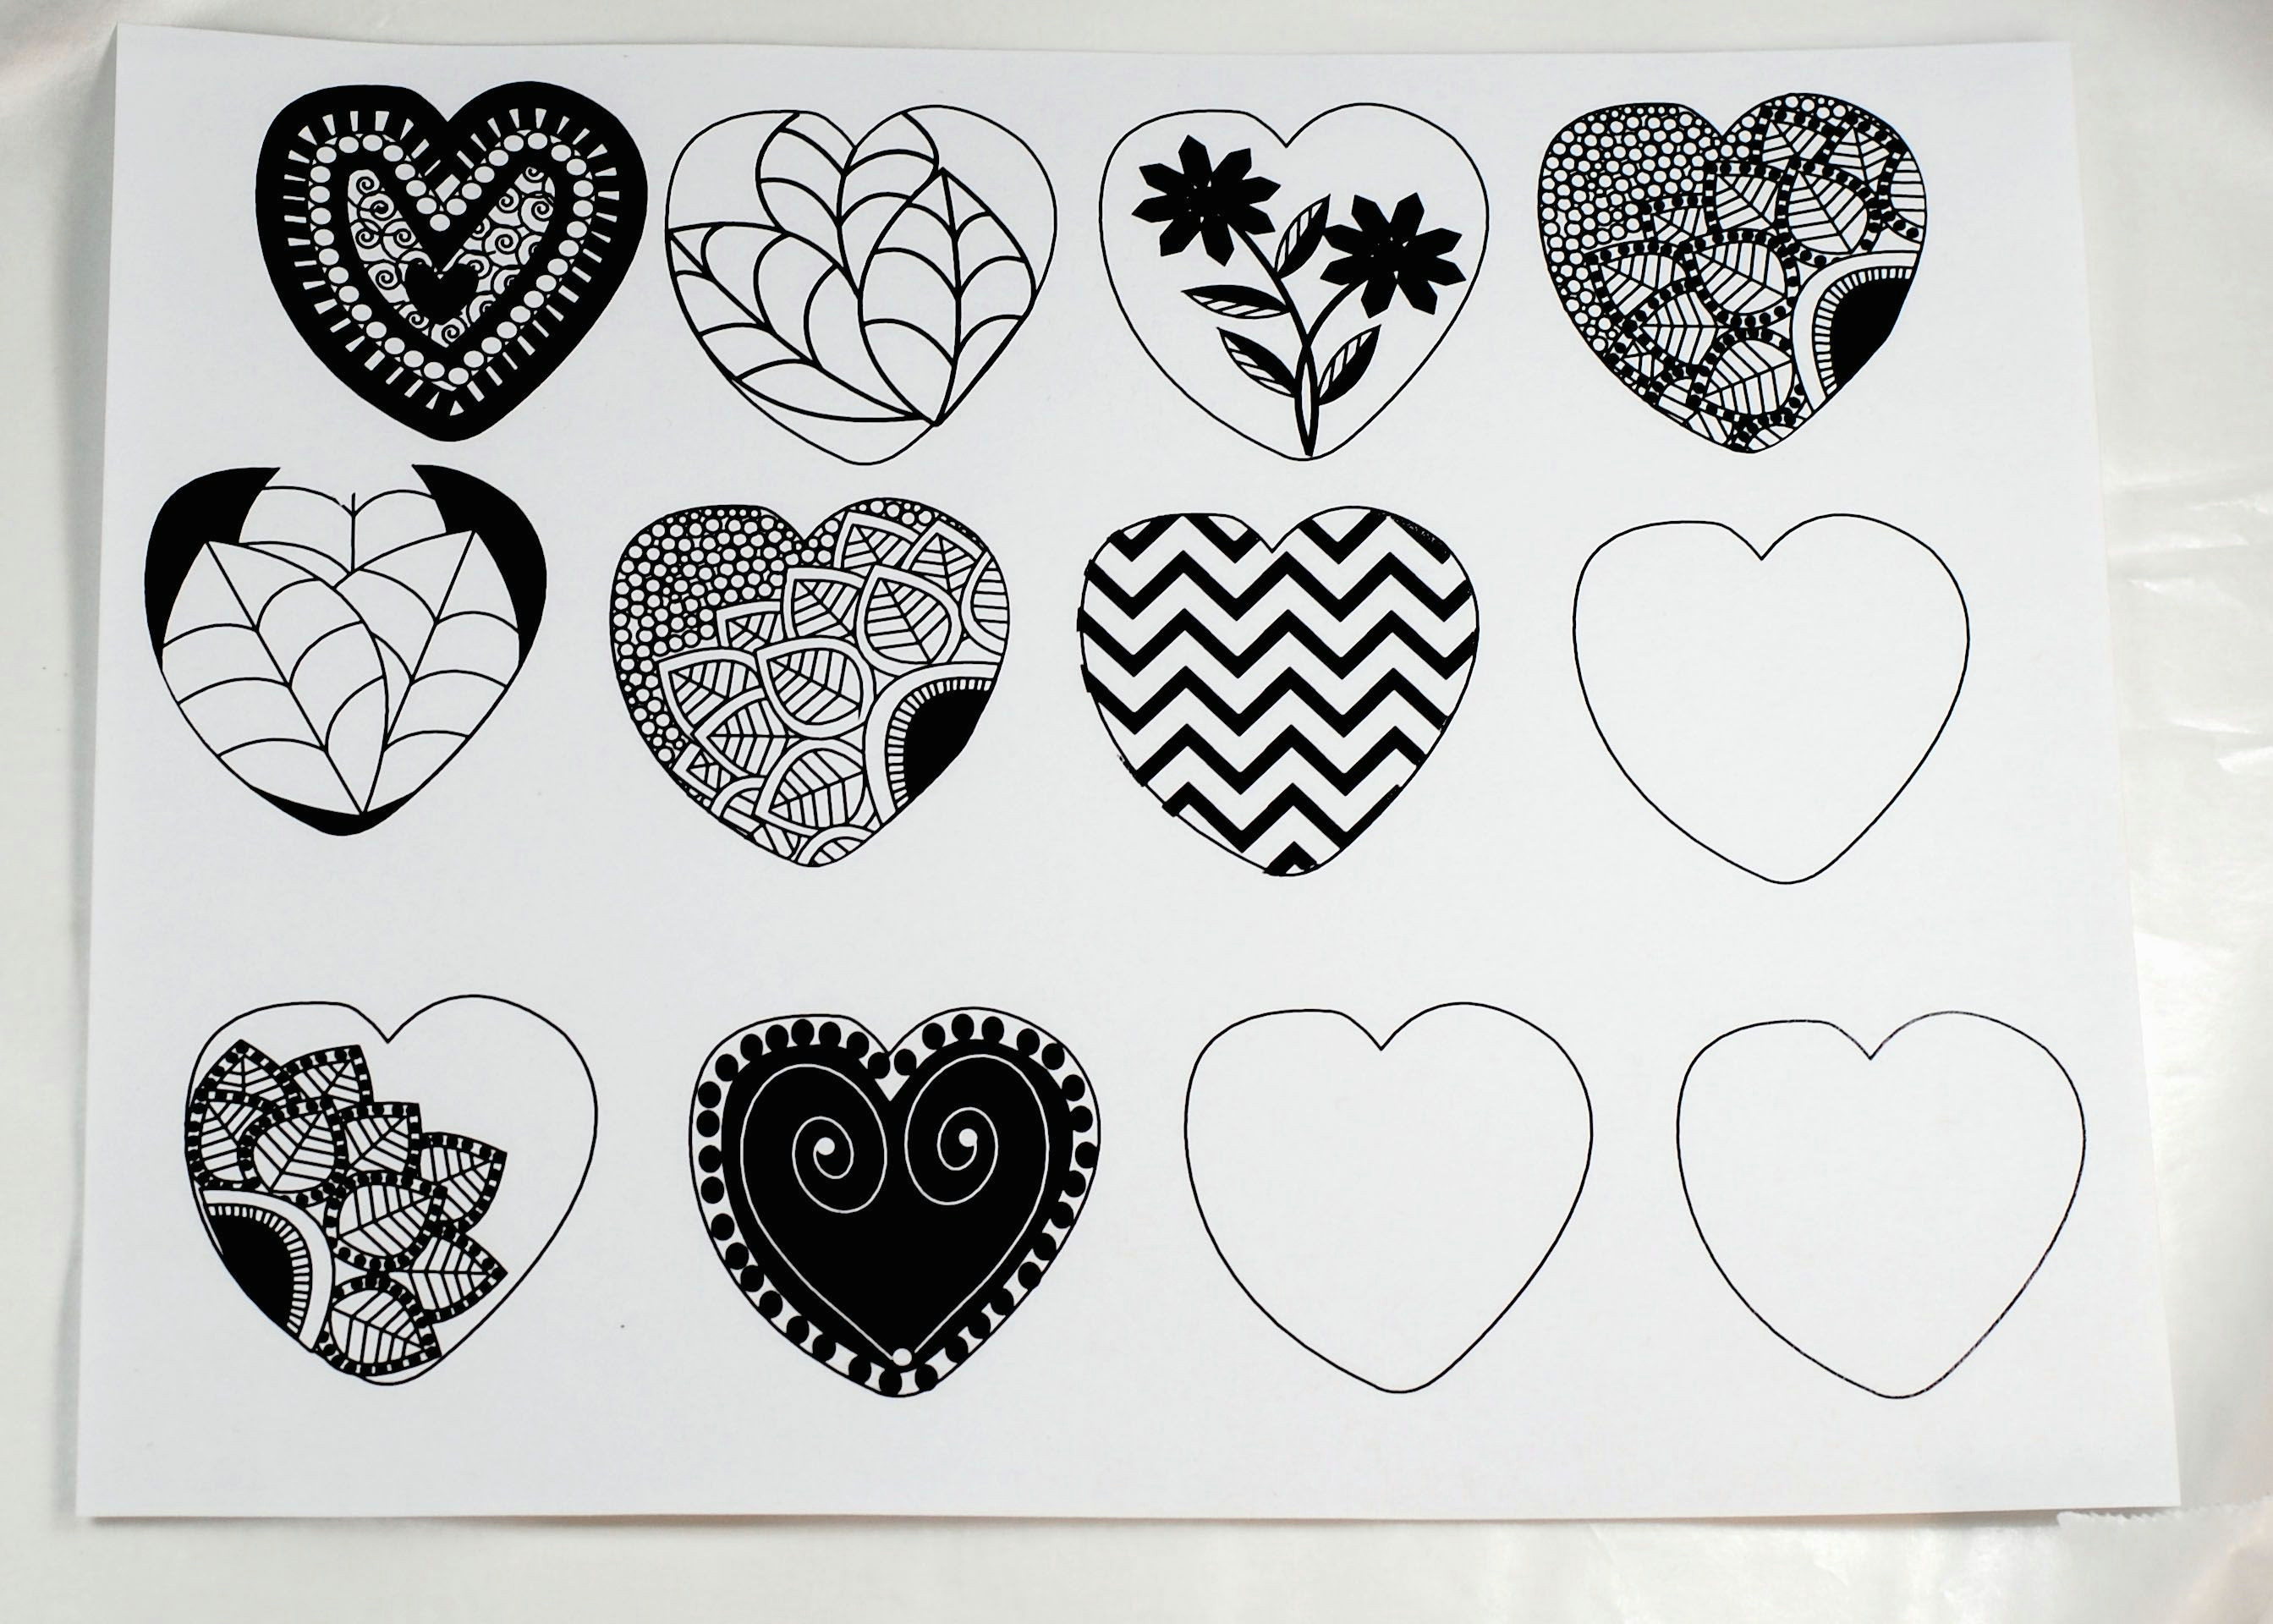 Drawing A Perfect Heart In Illustrator How to Make A Cute Paper Clay Doodled Heart